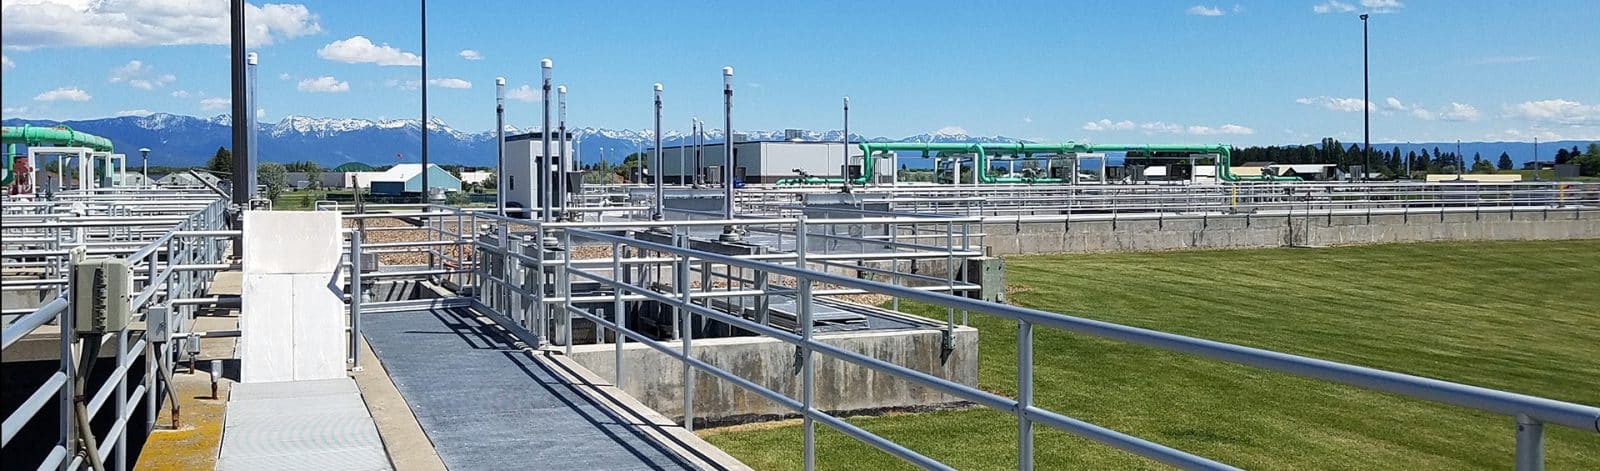 Fire Protection Measures for Wastewater and Collection Facilities